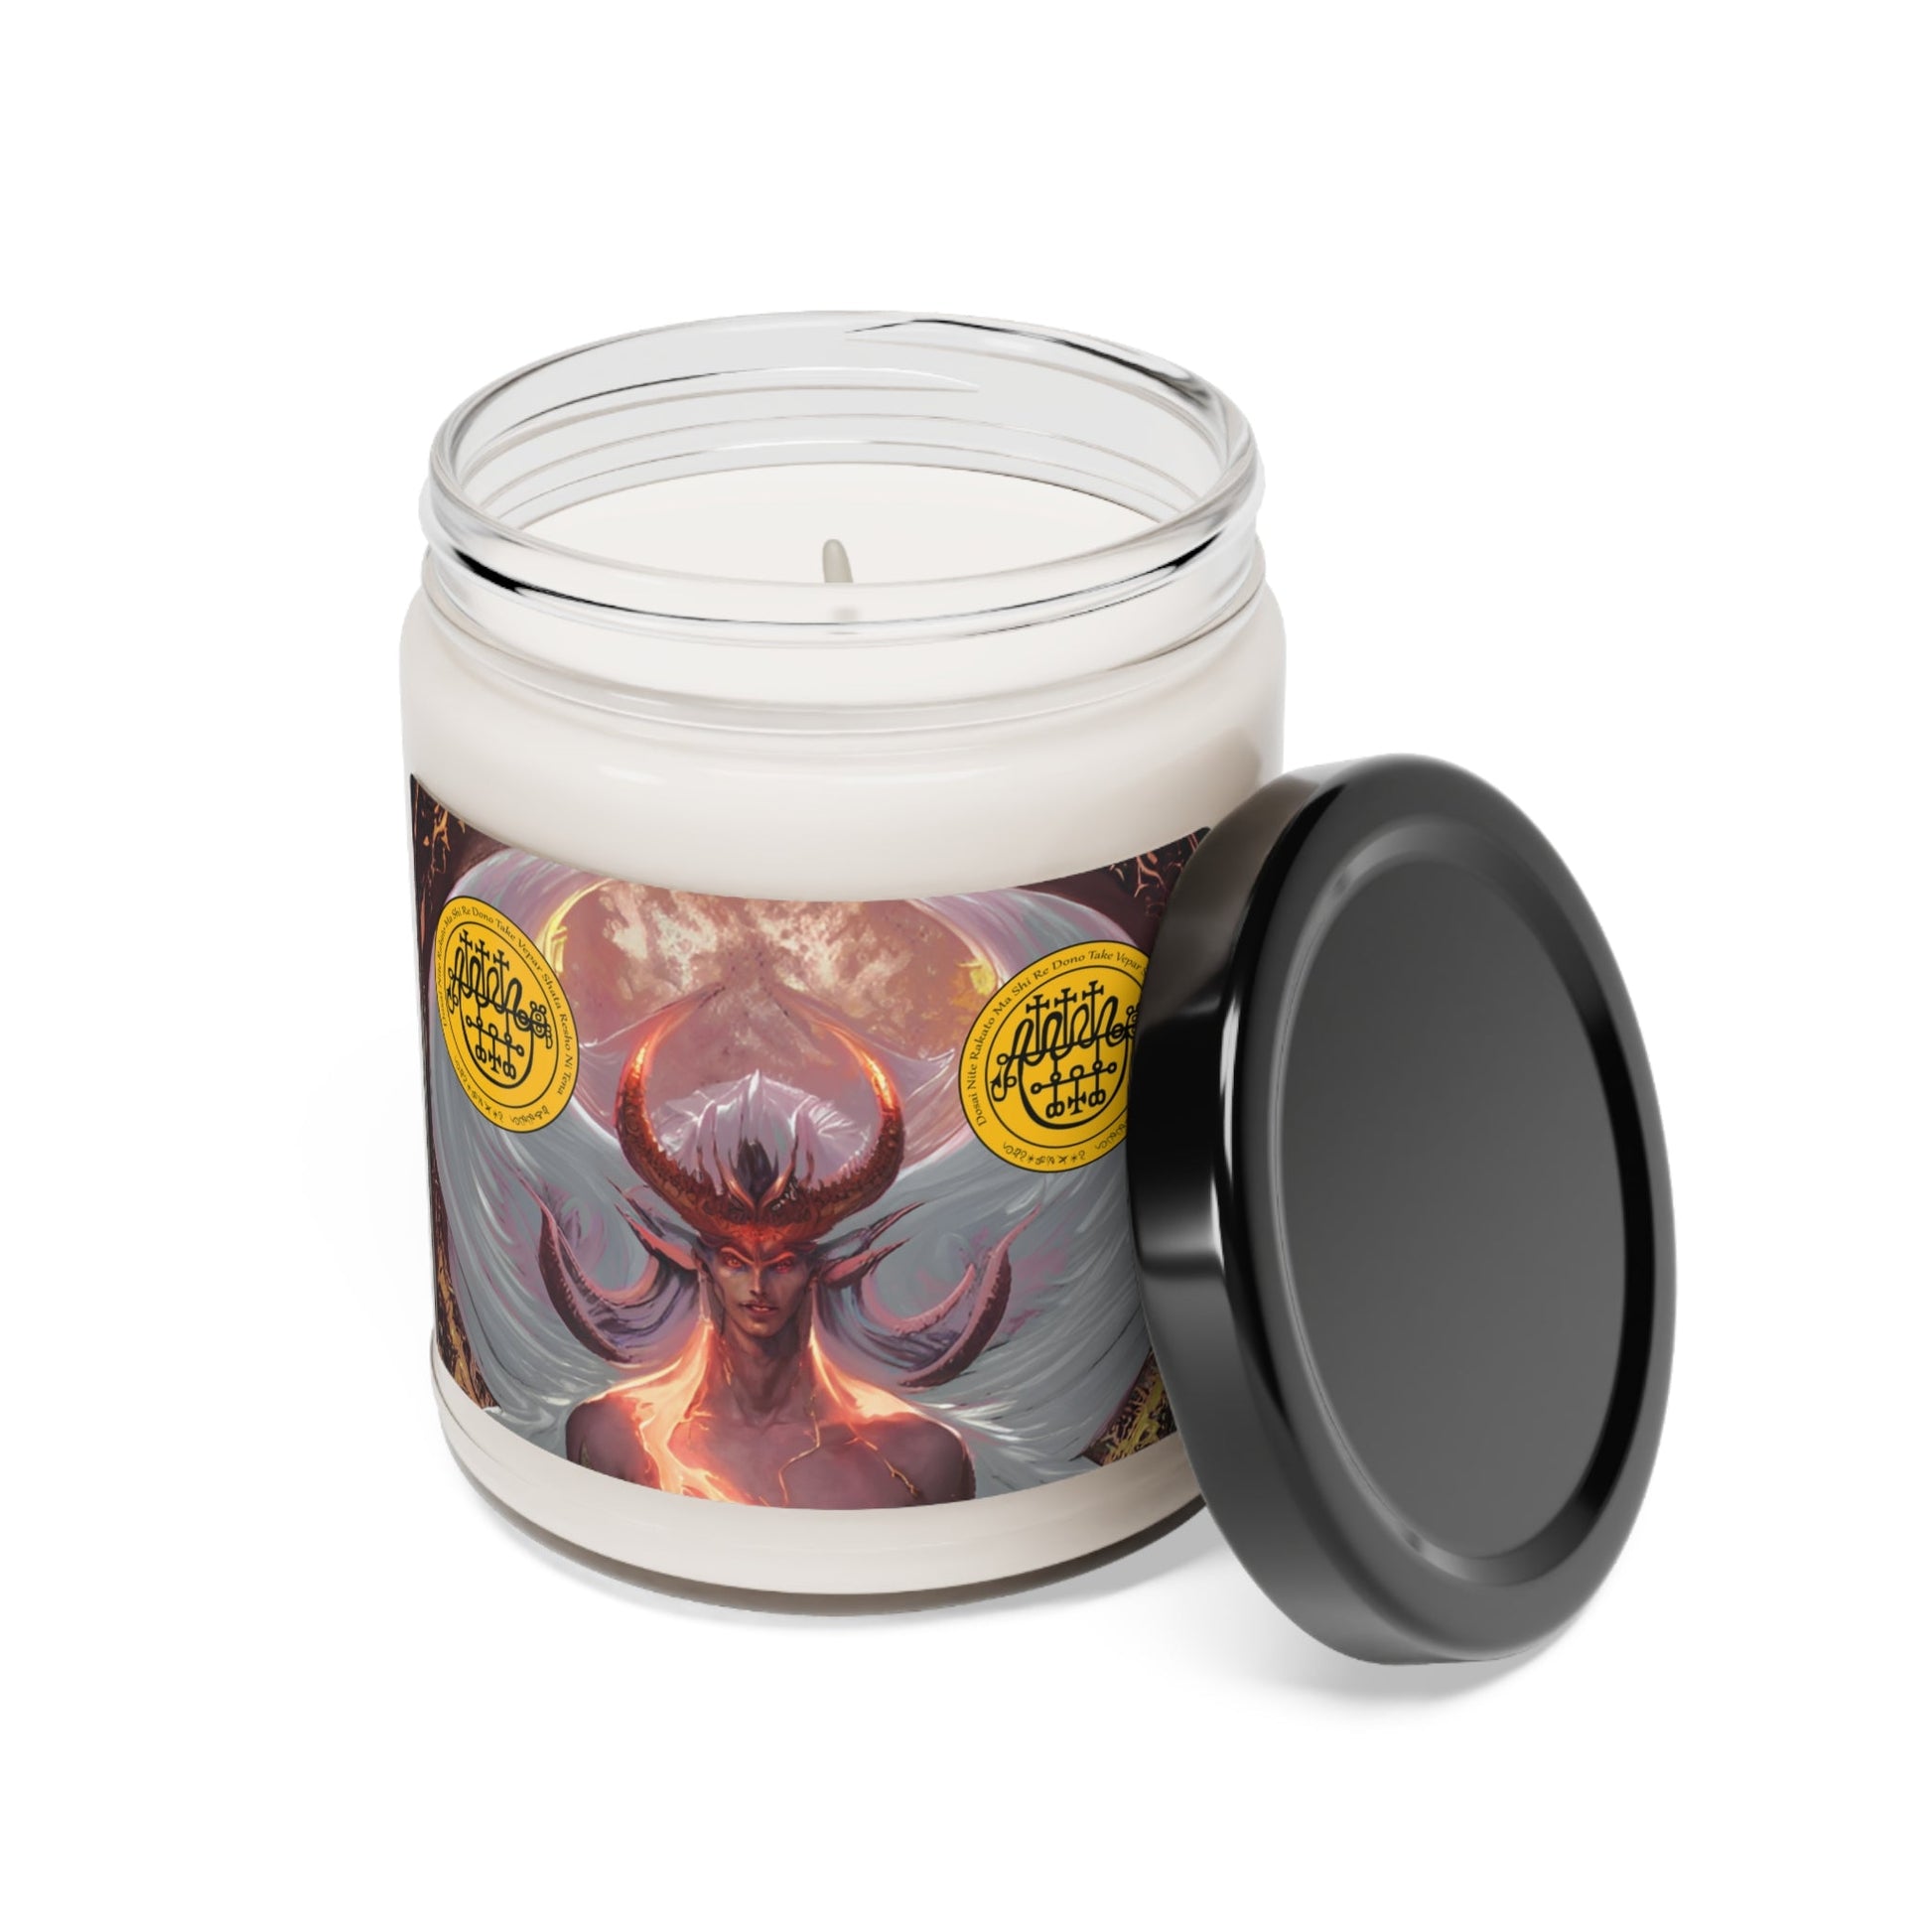 Demon-Vepar-Altar-Scented-Soy-Candle-for-offerings-rituals-initiations-or-praying-and-meditation-12